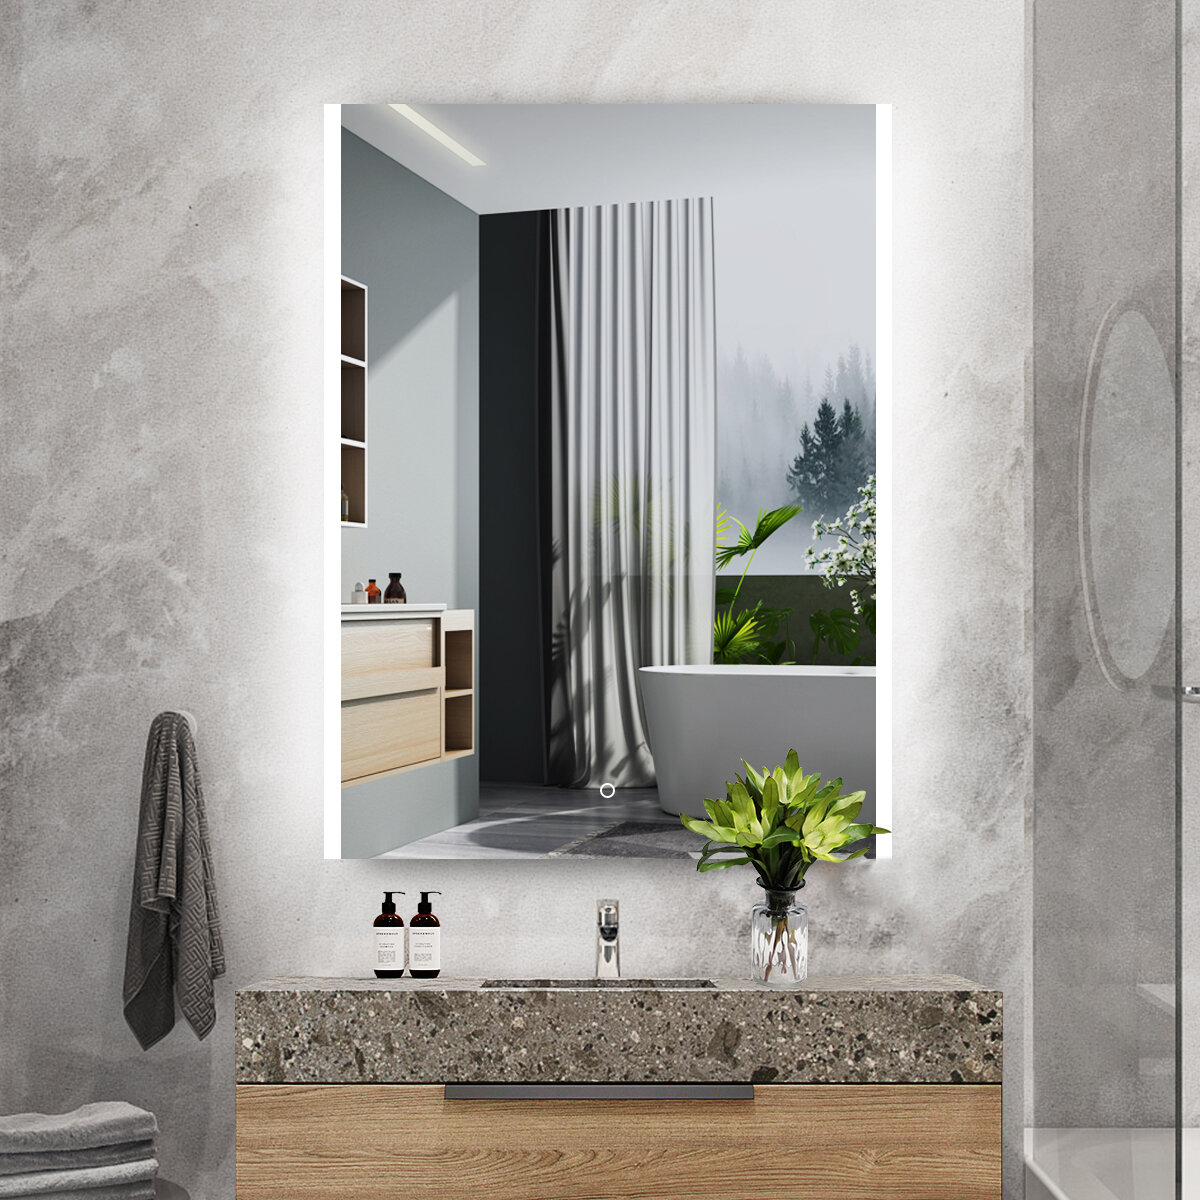 Details about   Delta 800 x 600mm Illuminated LED Mirror with Demister 